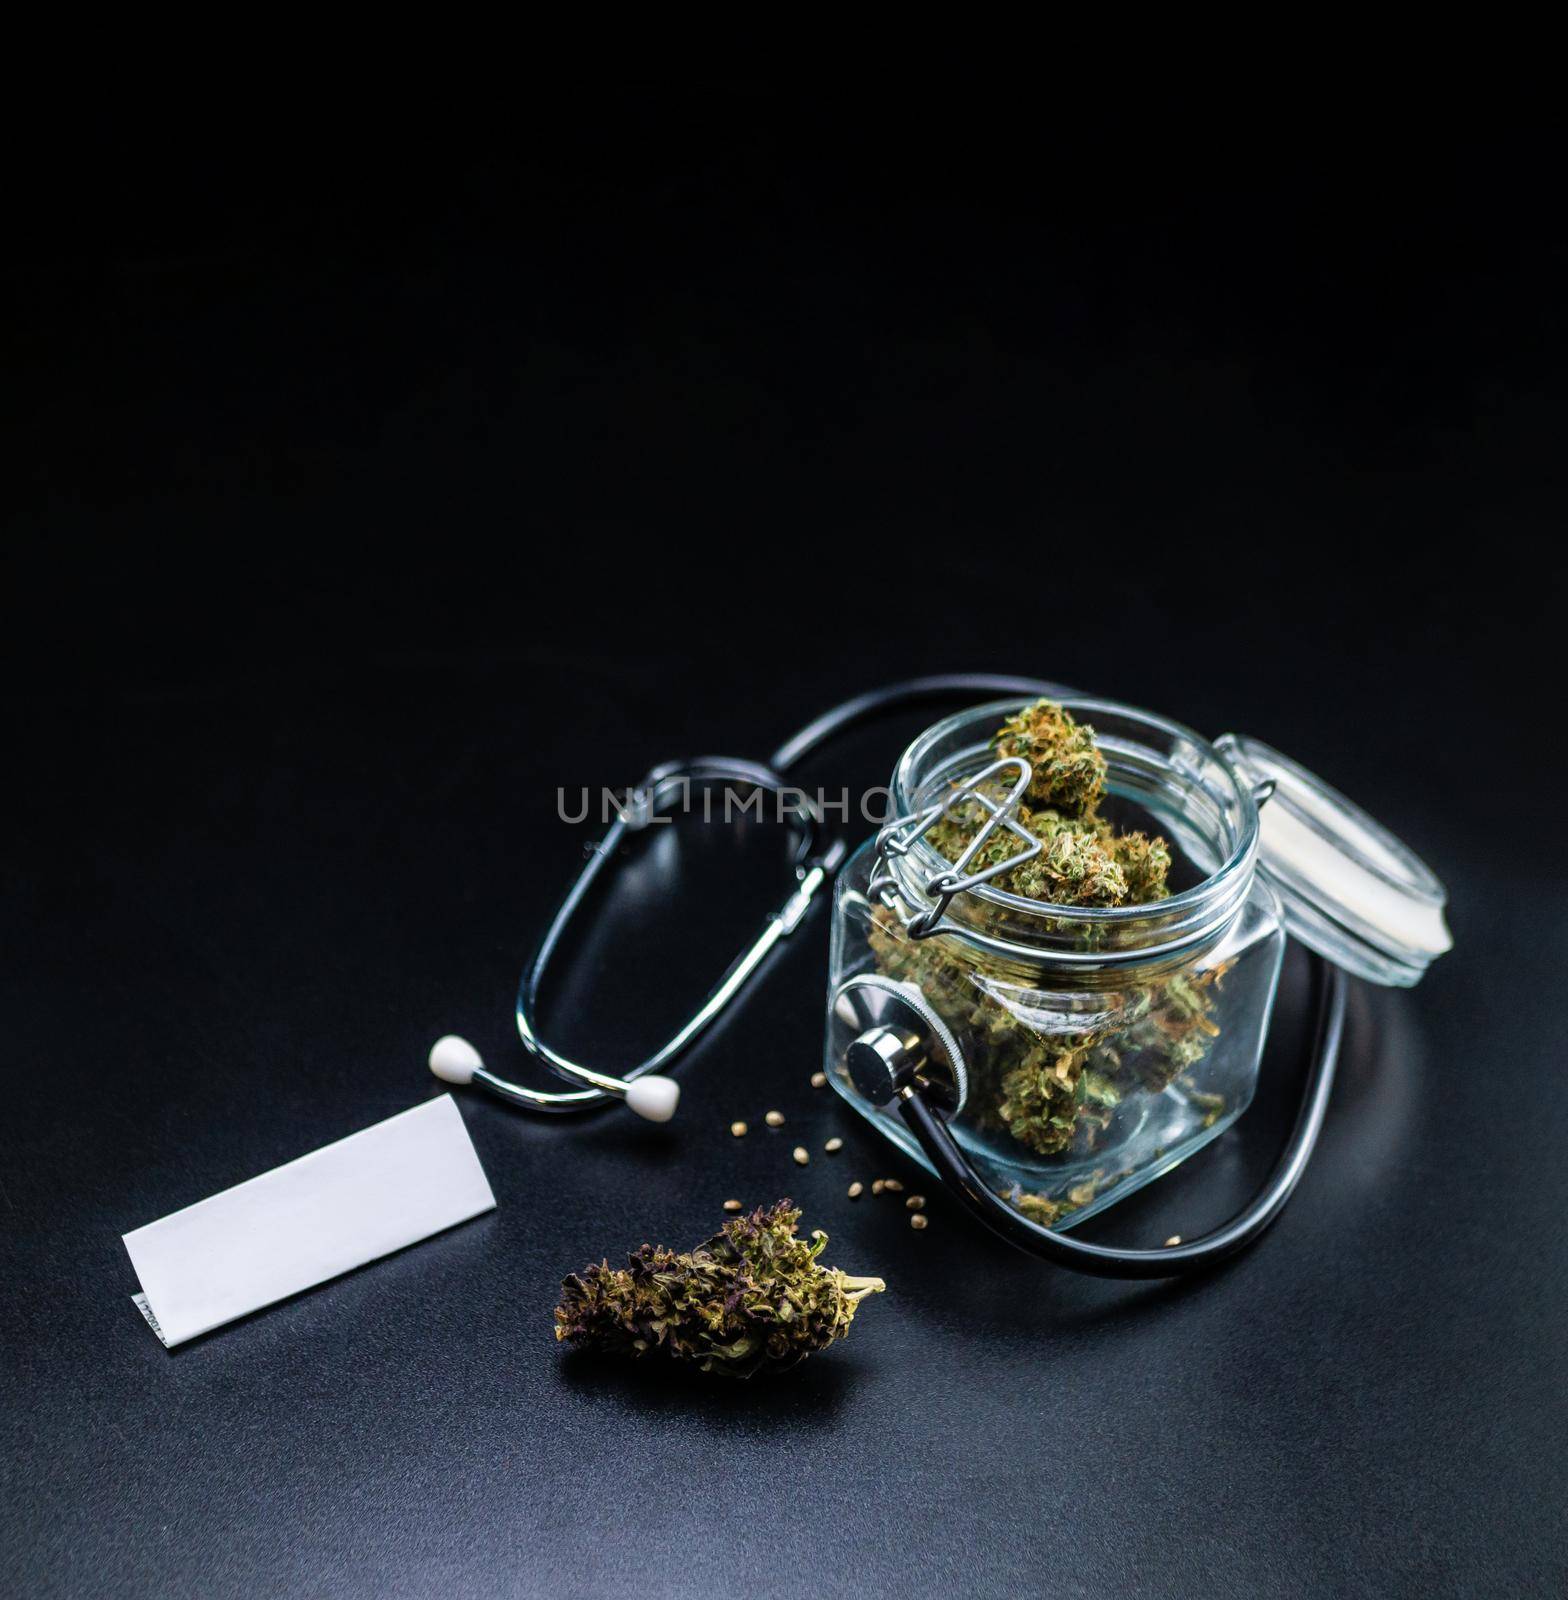 Dry medical cannabis in a jar with a stethoscope on a black background by Rotozey